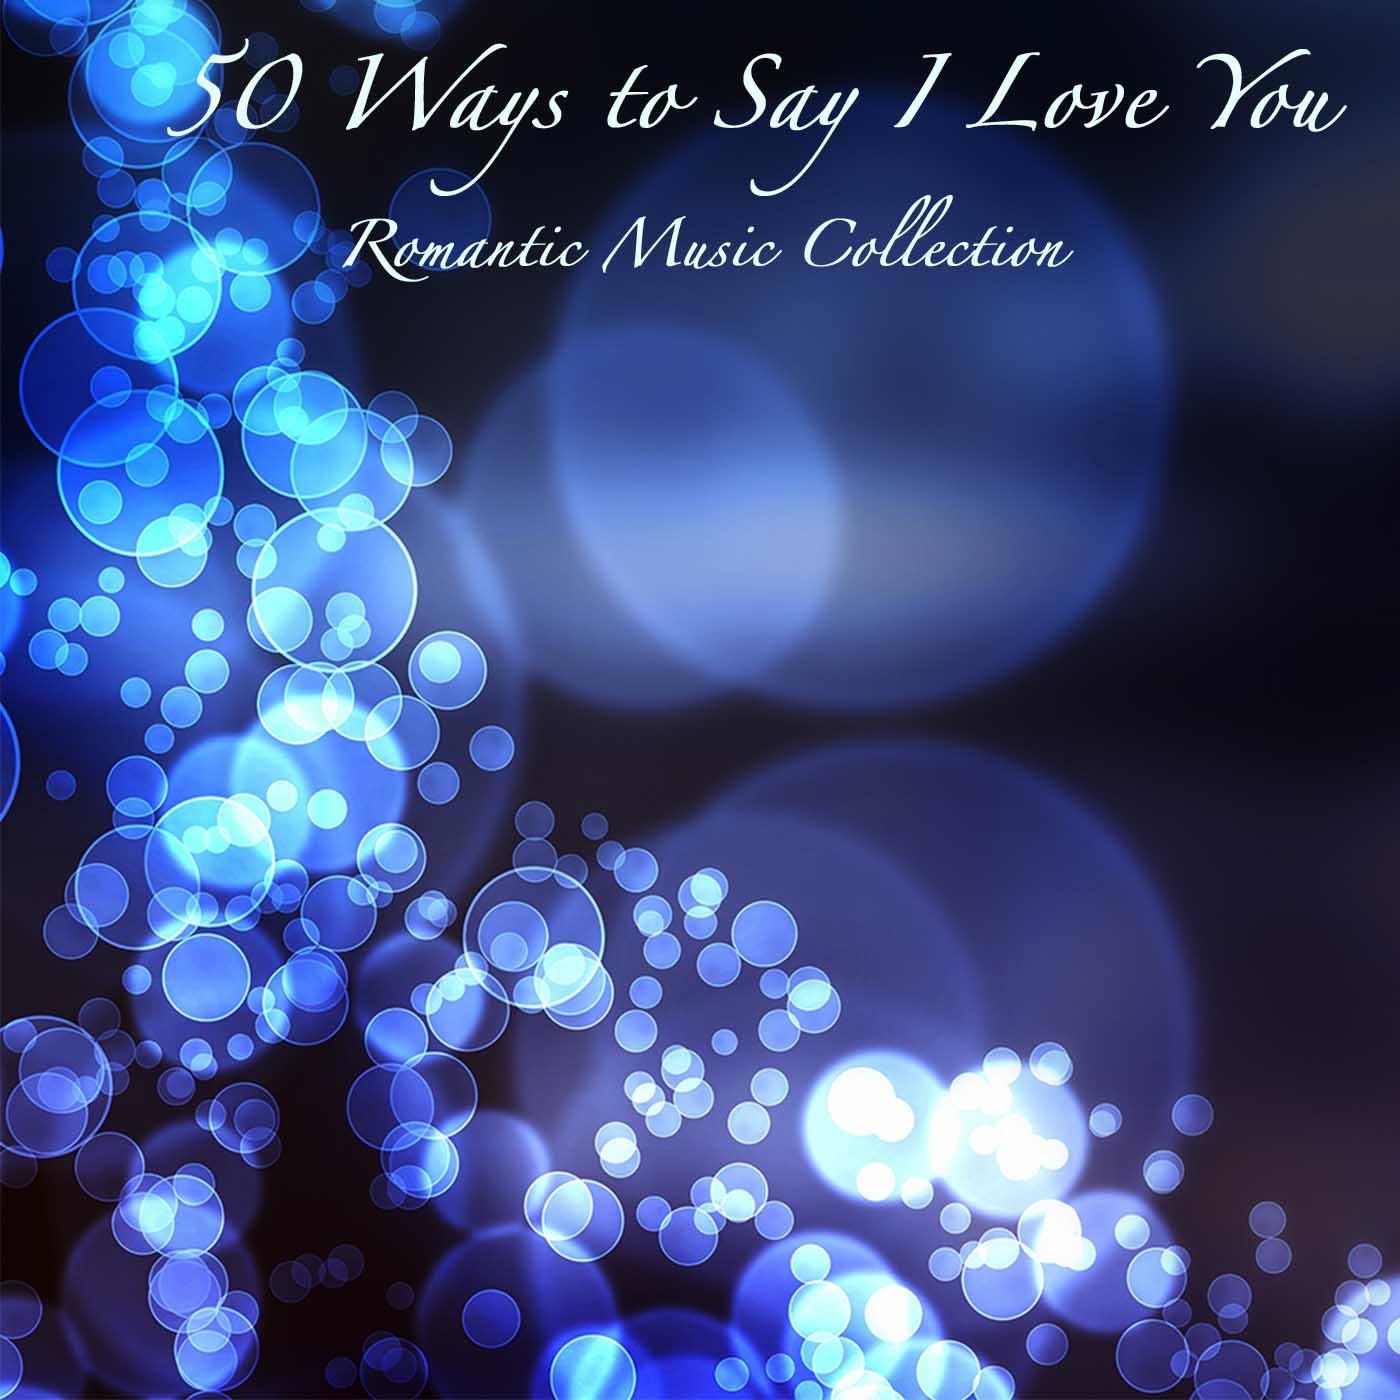 50 Ways to Say I Love You: Romantic Music Collection, Background Music, Candlelight Dinner Party Music Relaxing Piano Music Moods